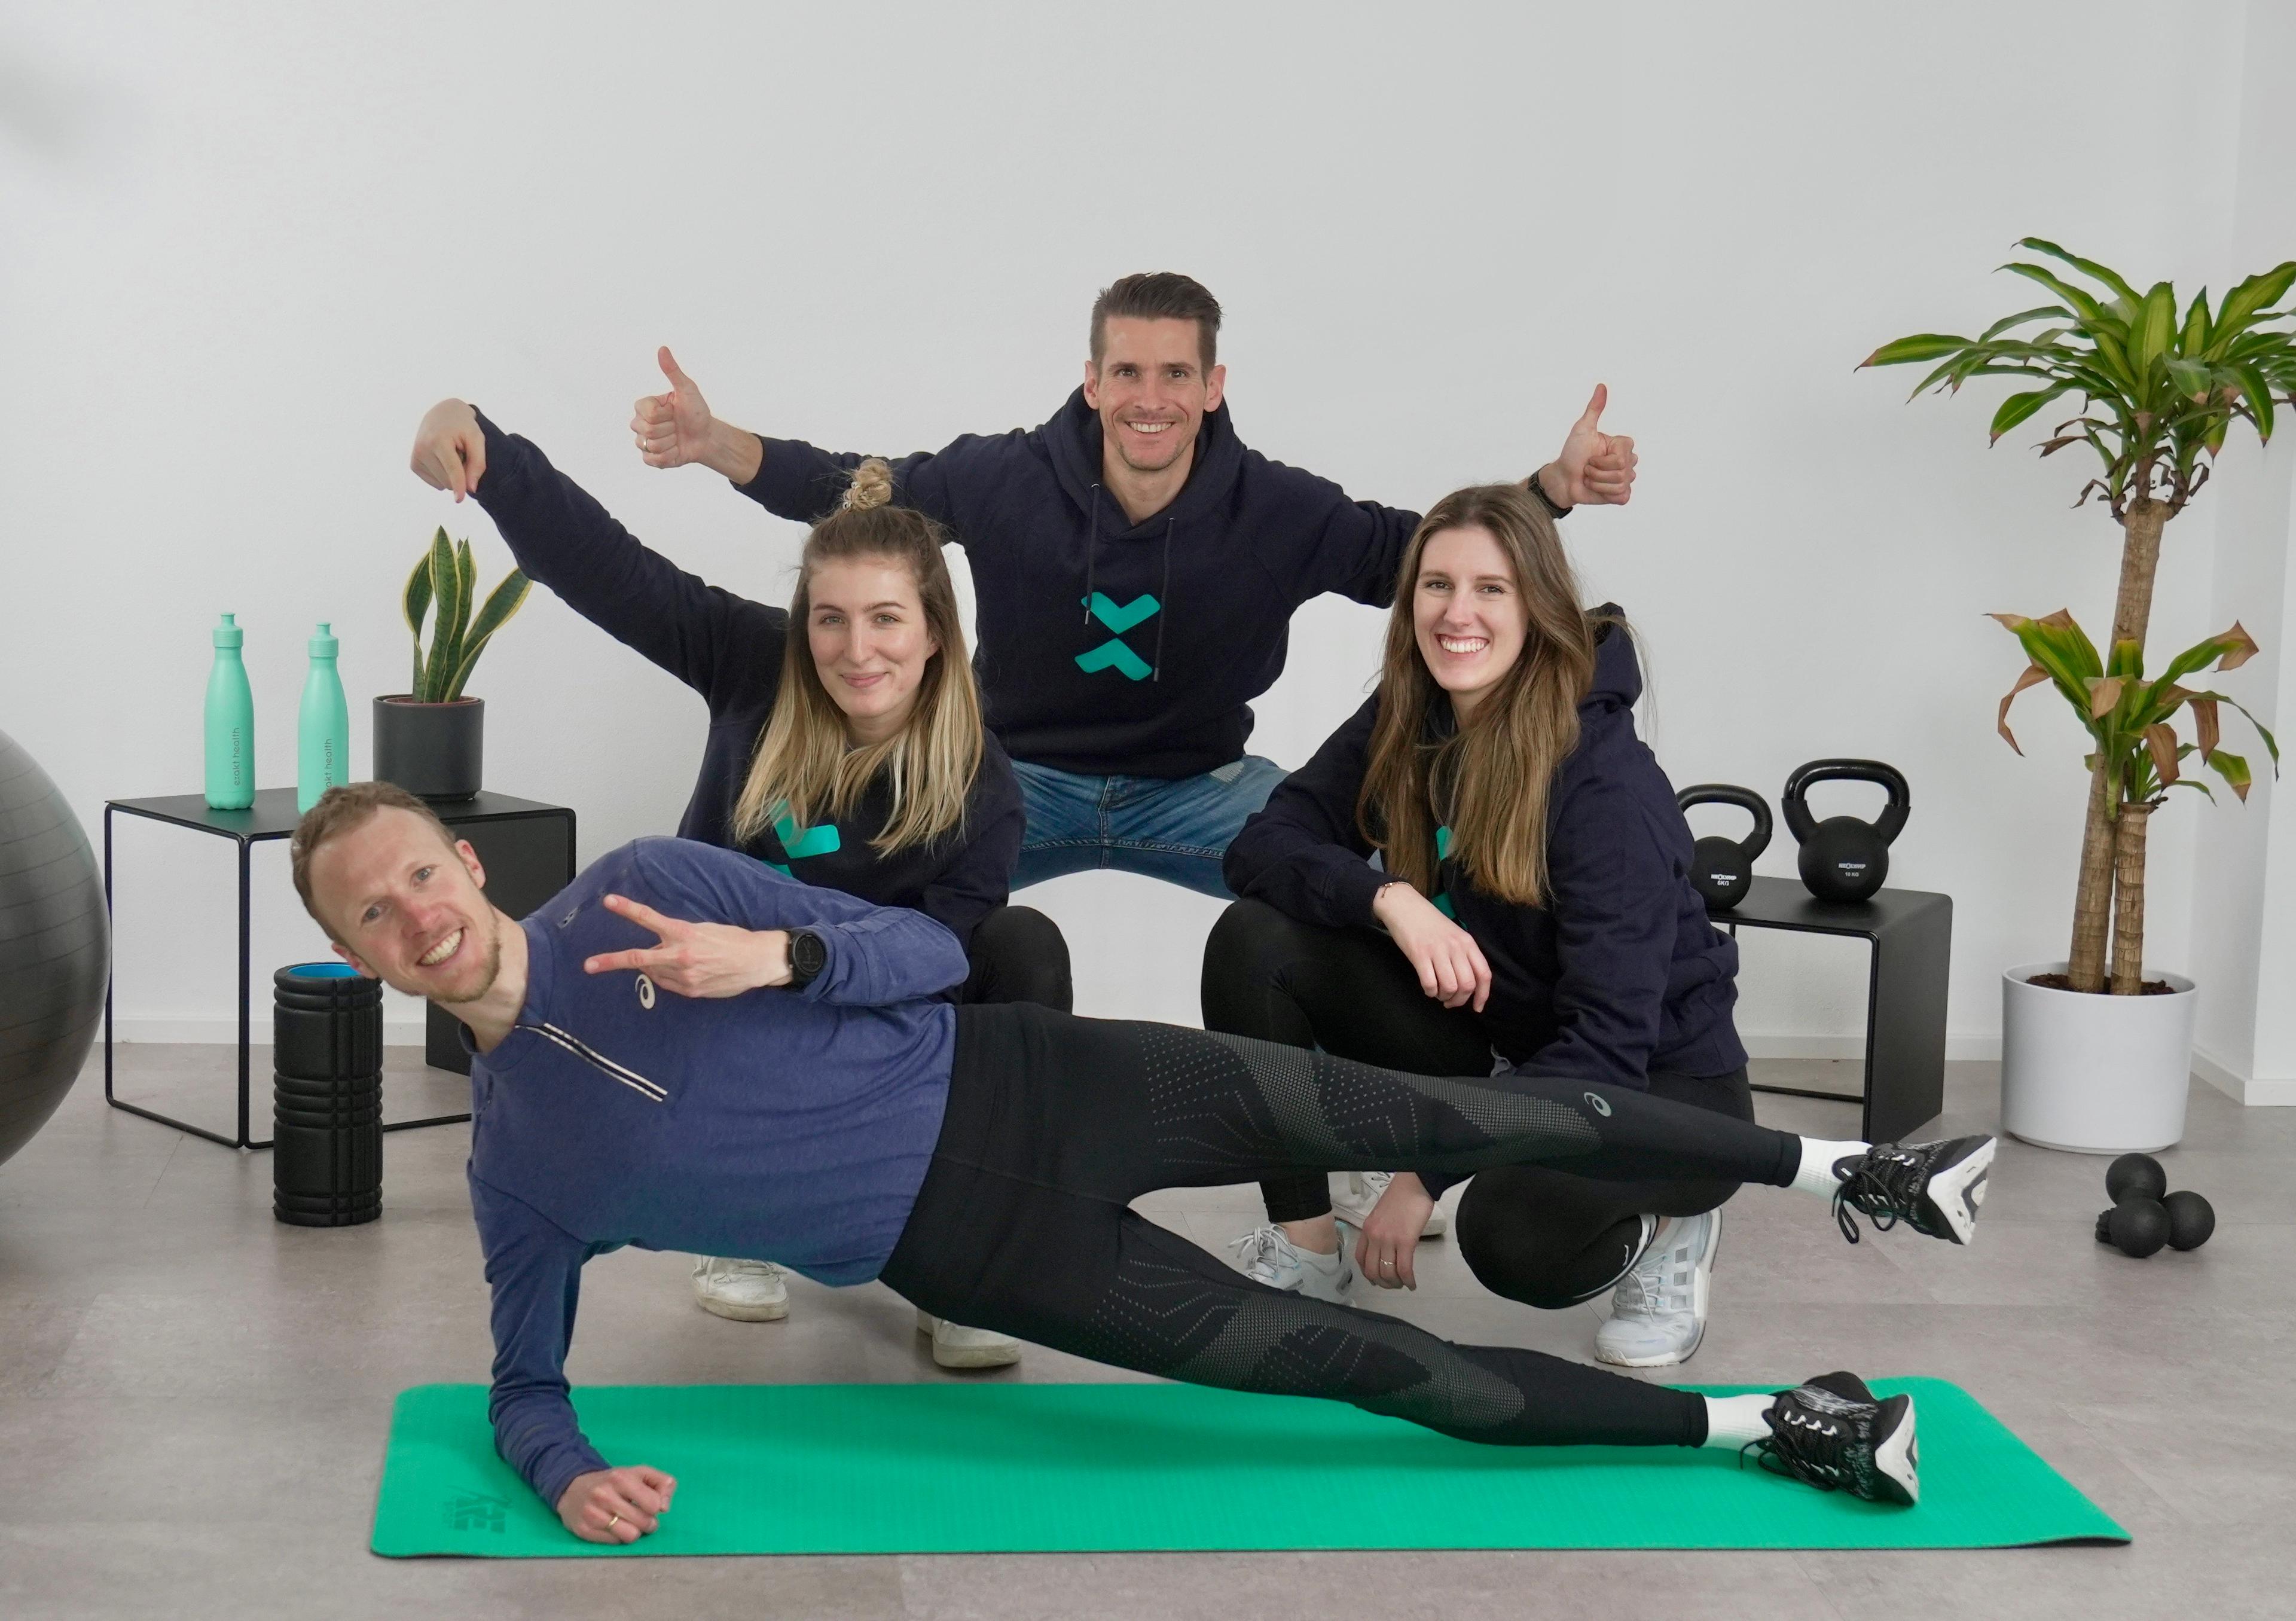 Team picture of Richard Ringer with the Exakt Health Team